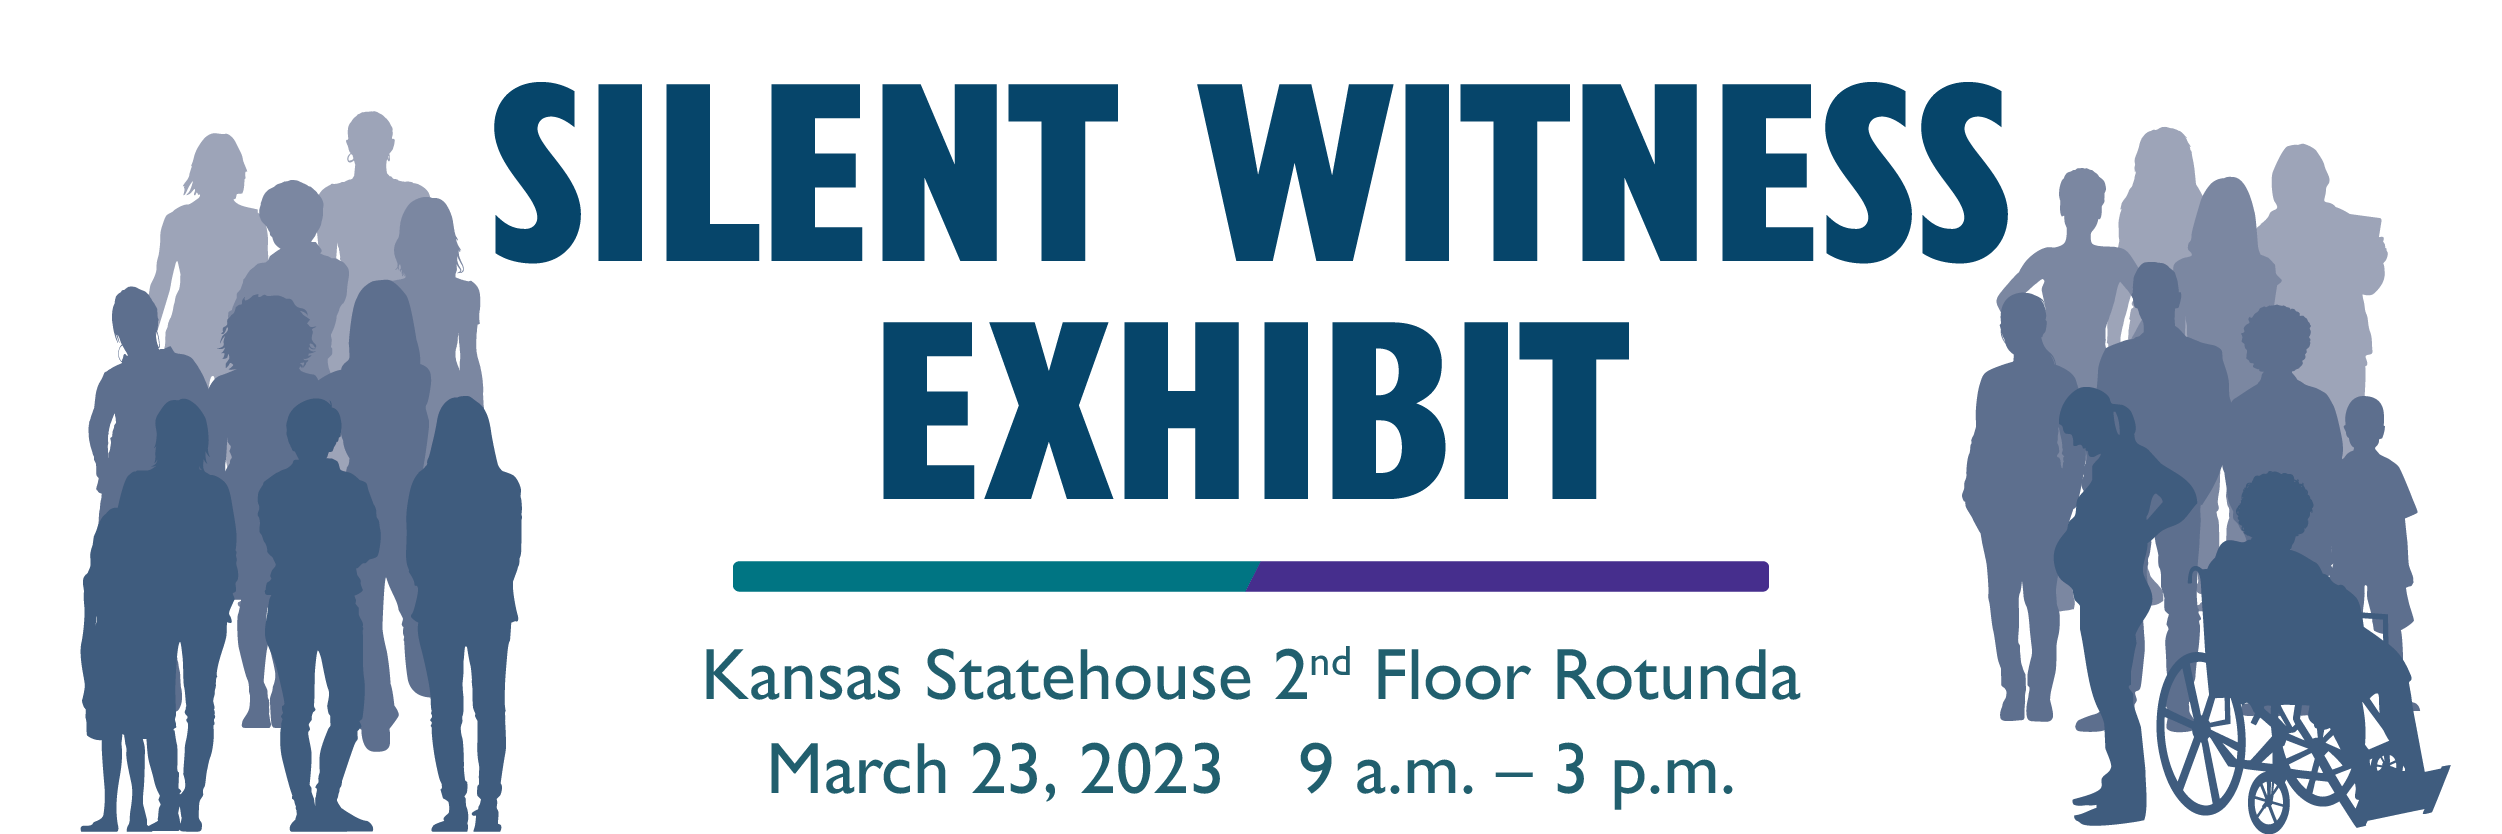 A group of people in silhouette in shades of blue with text that reads "Silent Witness Exhibit, Kansas Statehouse Second Floor Rotunda, March 23, 2023, 9 a.m. to 3 p.m."